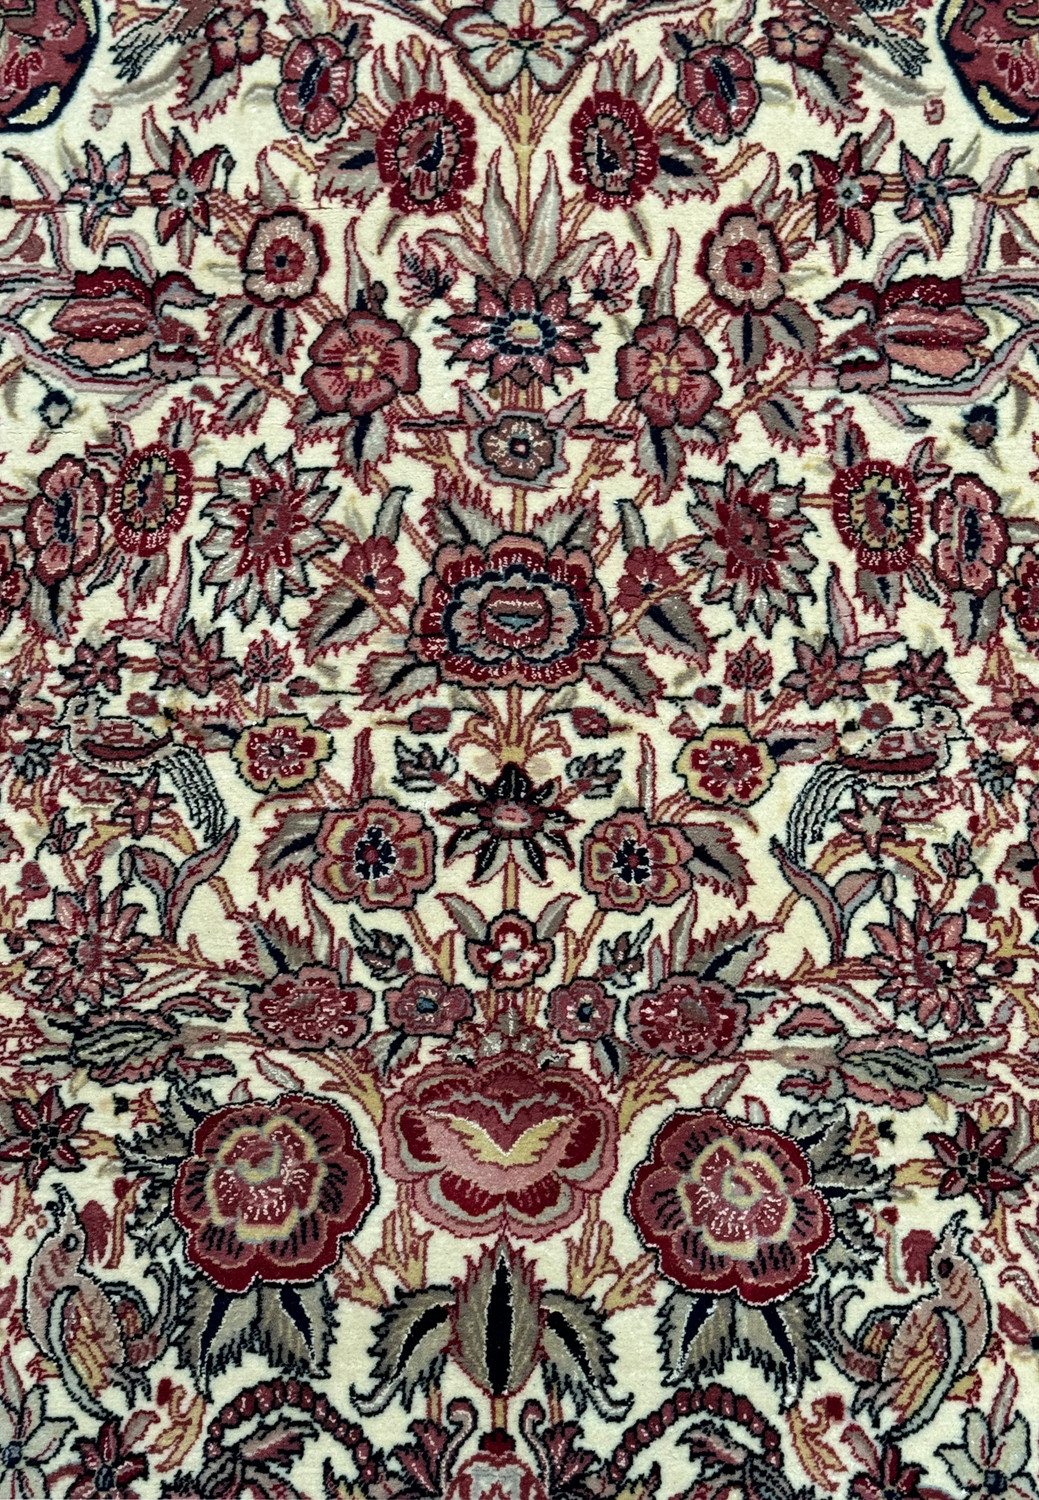 High-resolution close-up of the Persian Qum rug's central design, with a focus on the clarity of the patterns and the vibrant hues of the dyes used in the weaving process.